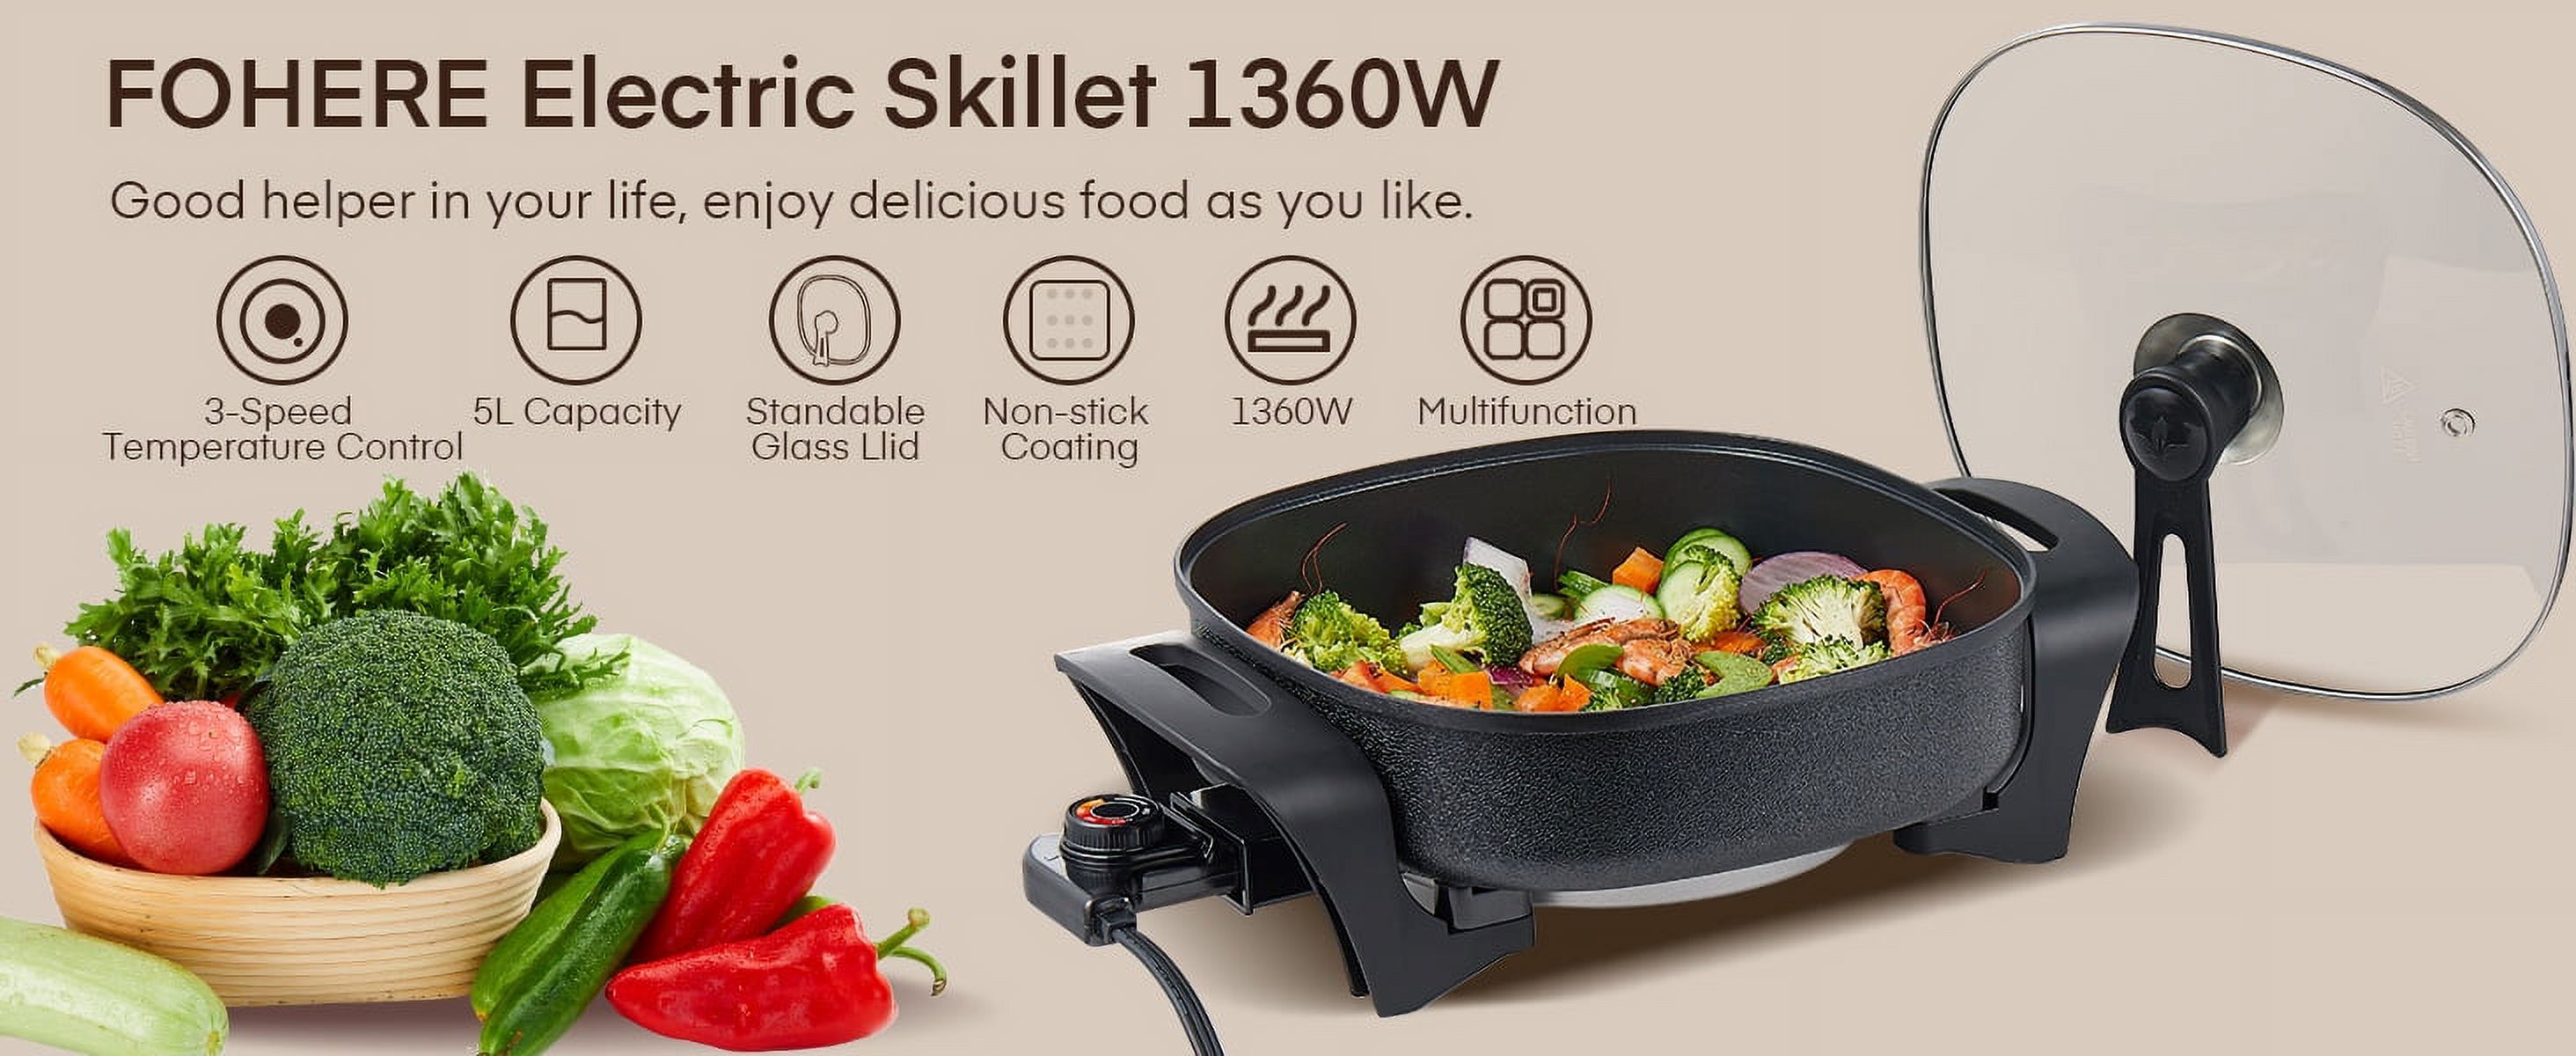 Electric Skillet, 12 Inch Deep Non Stick Electric Frying Pan with Standable Glass Lid, 3 Marked Heating Levels, Heat Resistant Handles, 1360W, Black, 6x12x2.8 inch - image 5 of 15